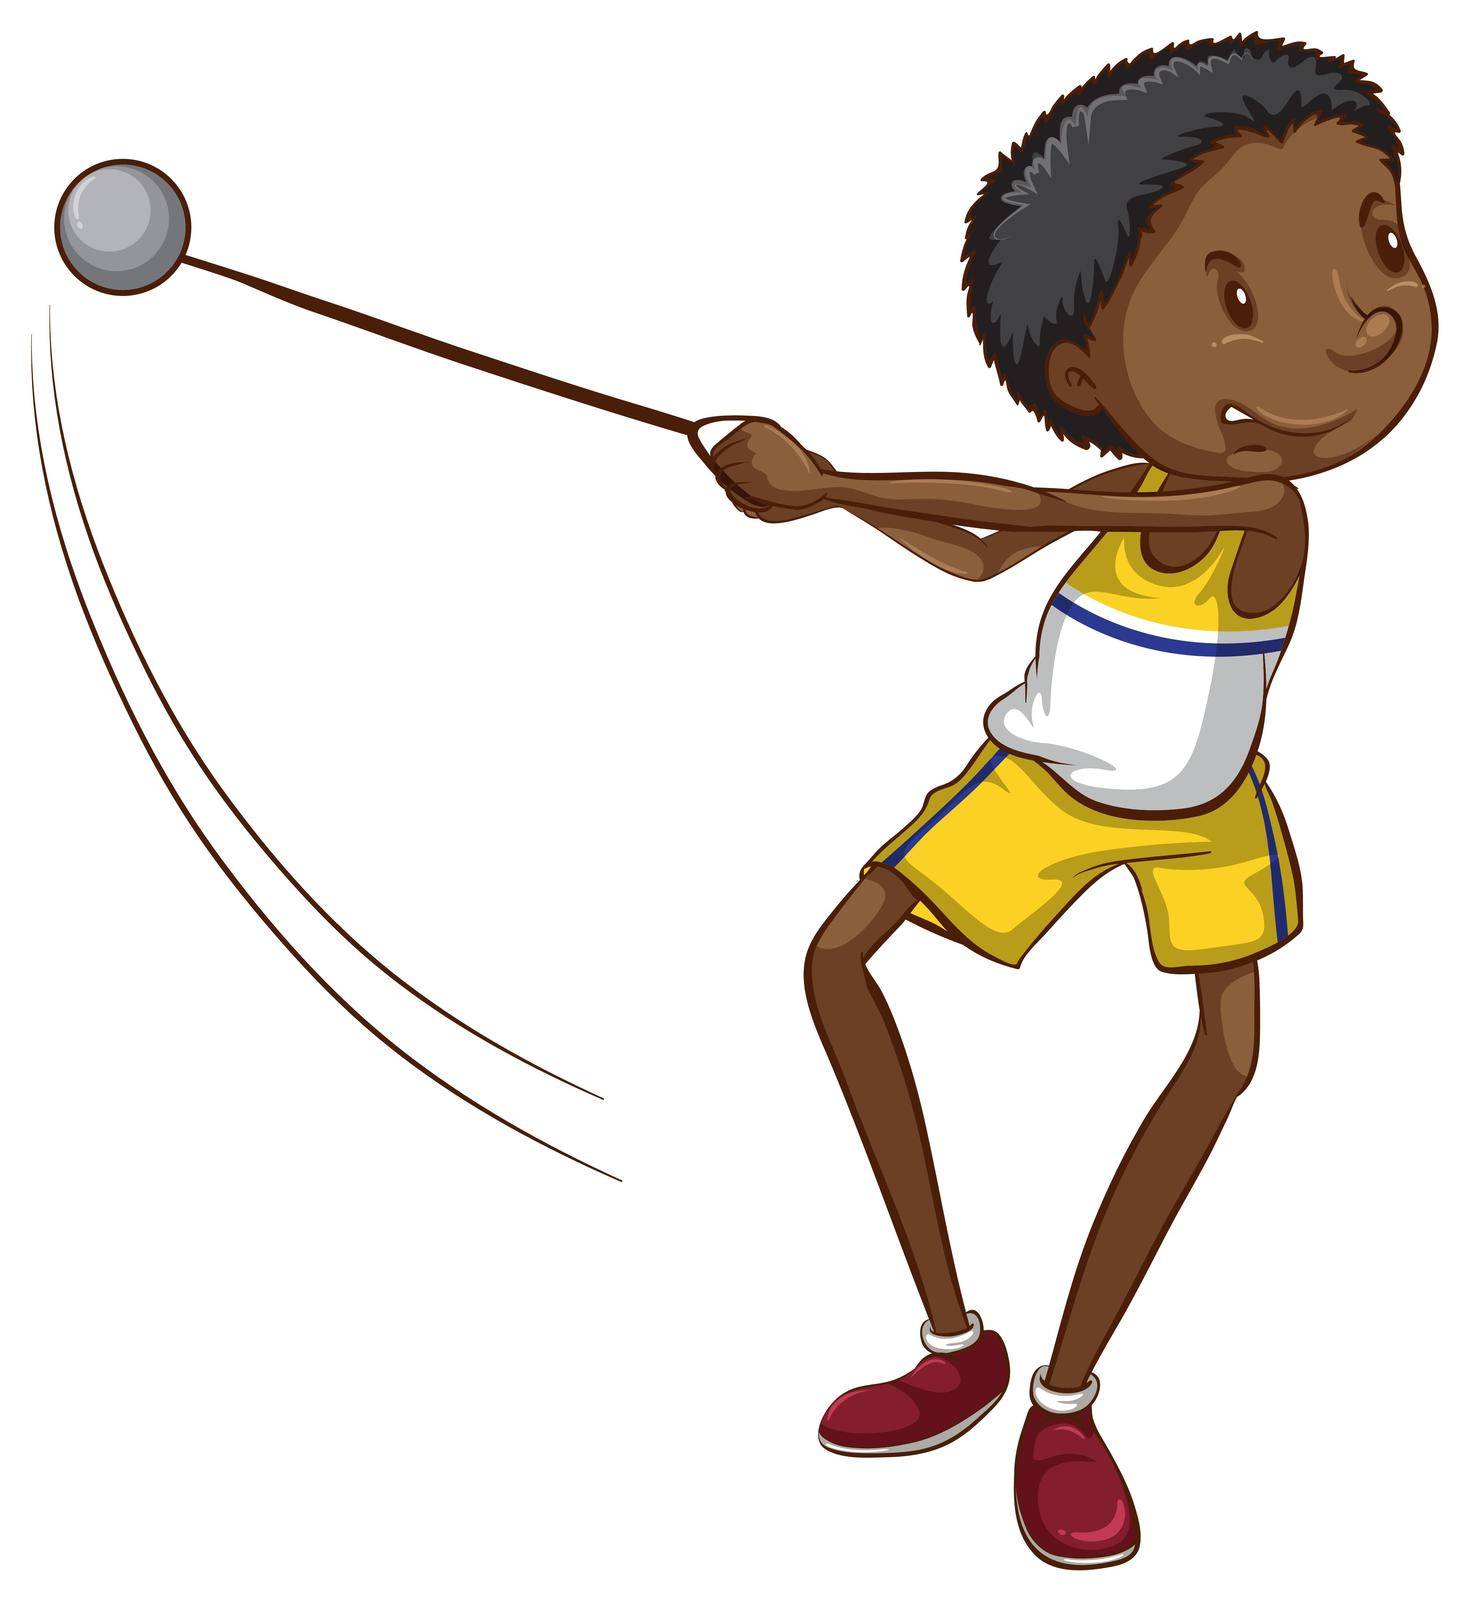 A simple drawing of a young boy throwing a ball by iimages